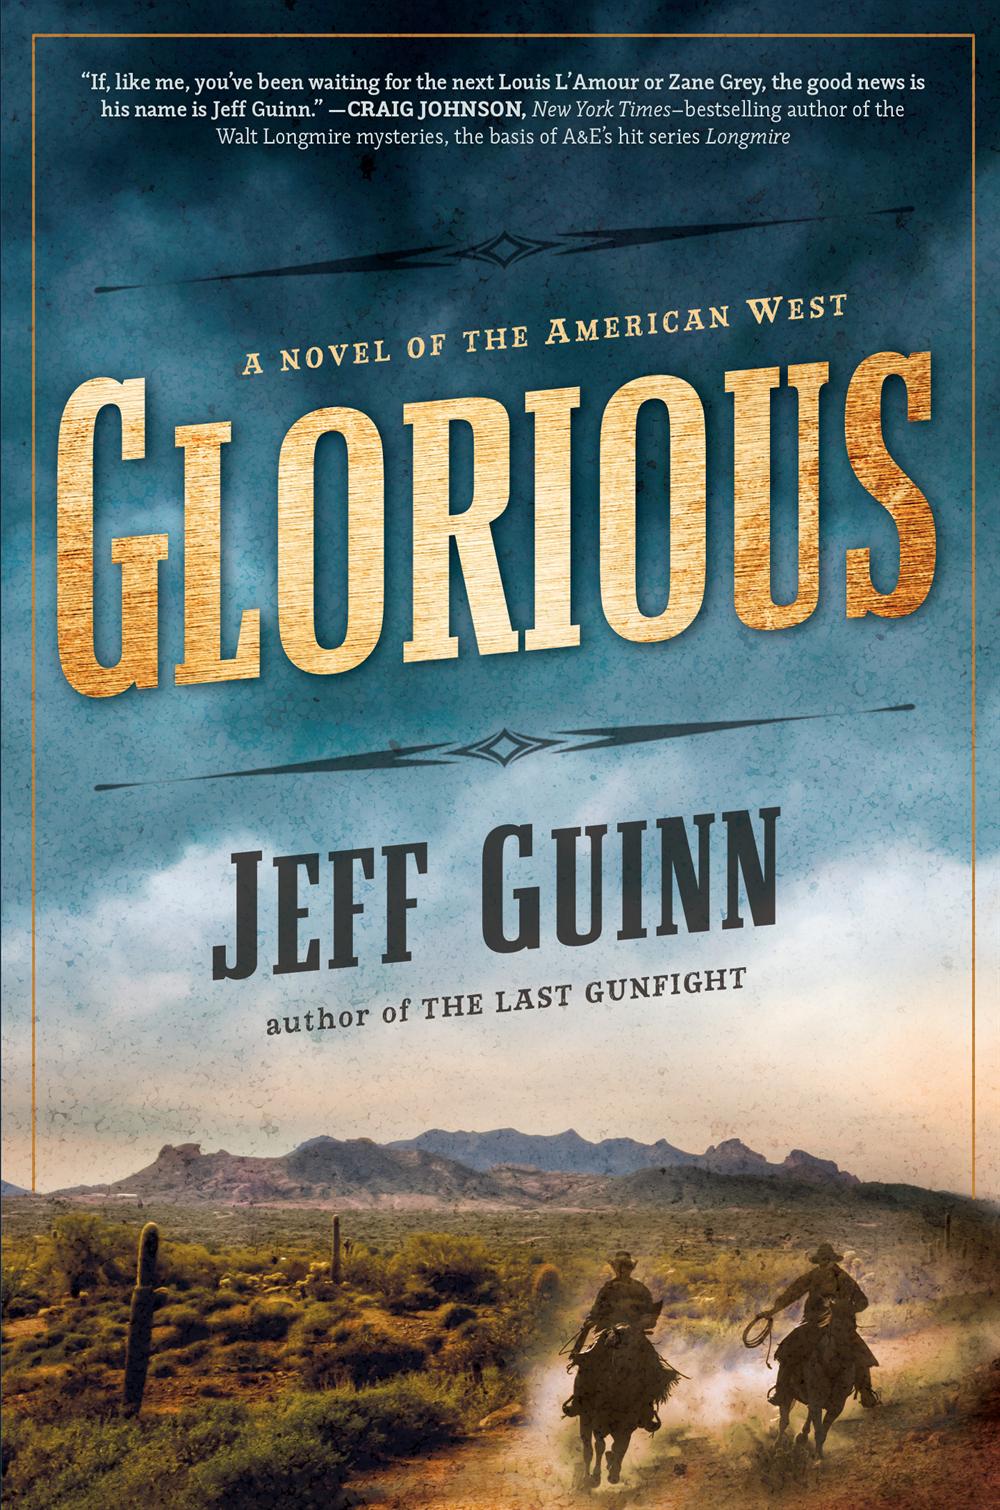 Glorious: A Novel of the American West